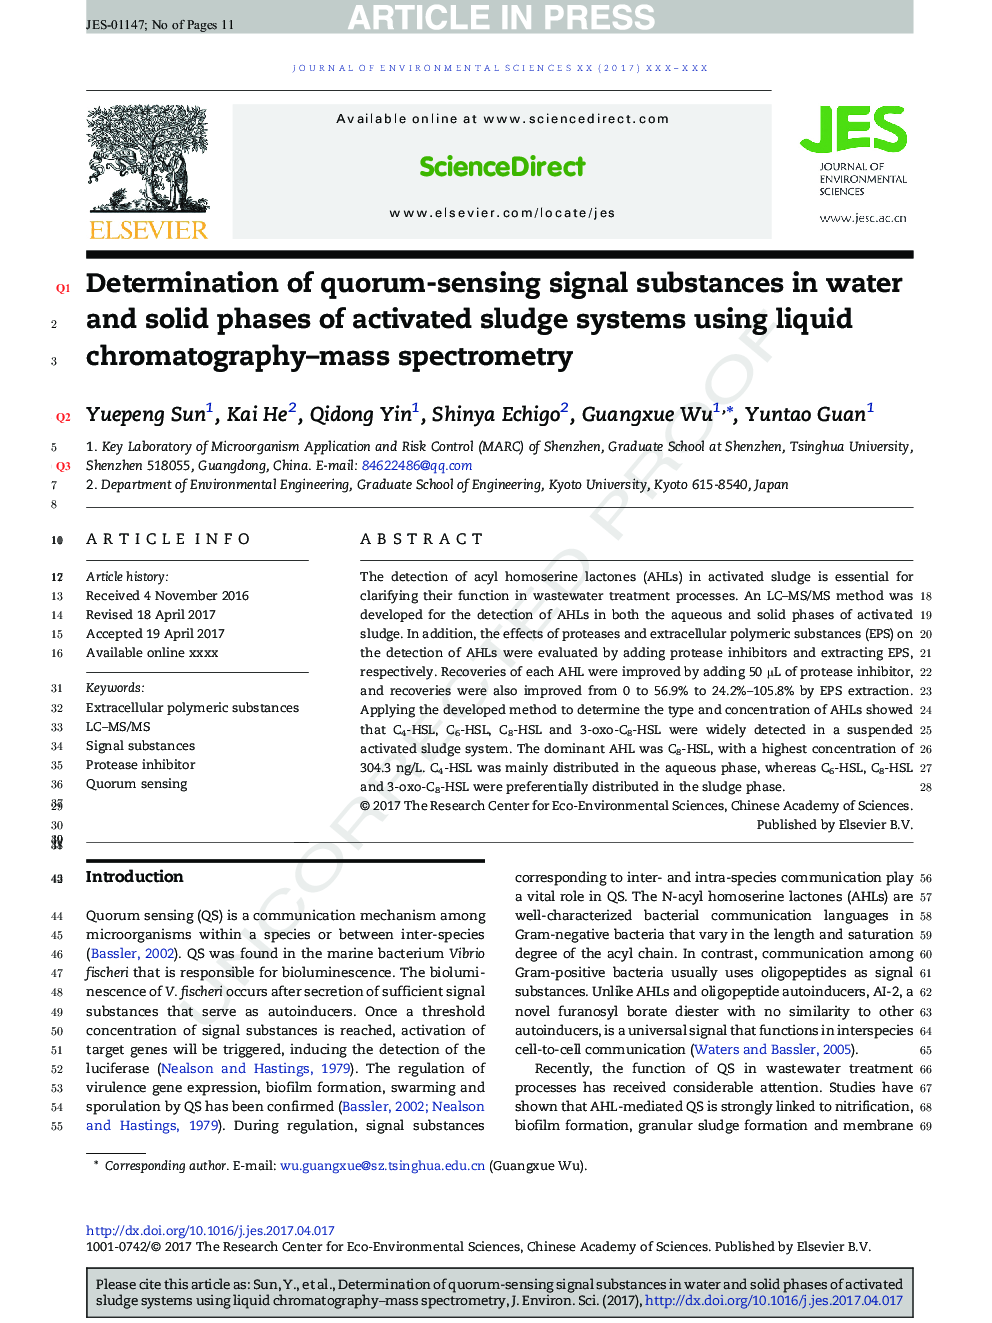 Determination of quorum-sensing signal substances in water and solid phases of activated sludge systems using liquid chromatography-mass spectrometry